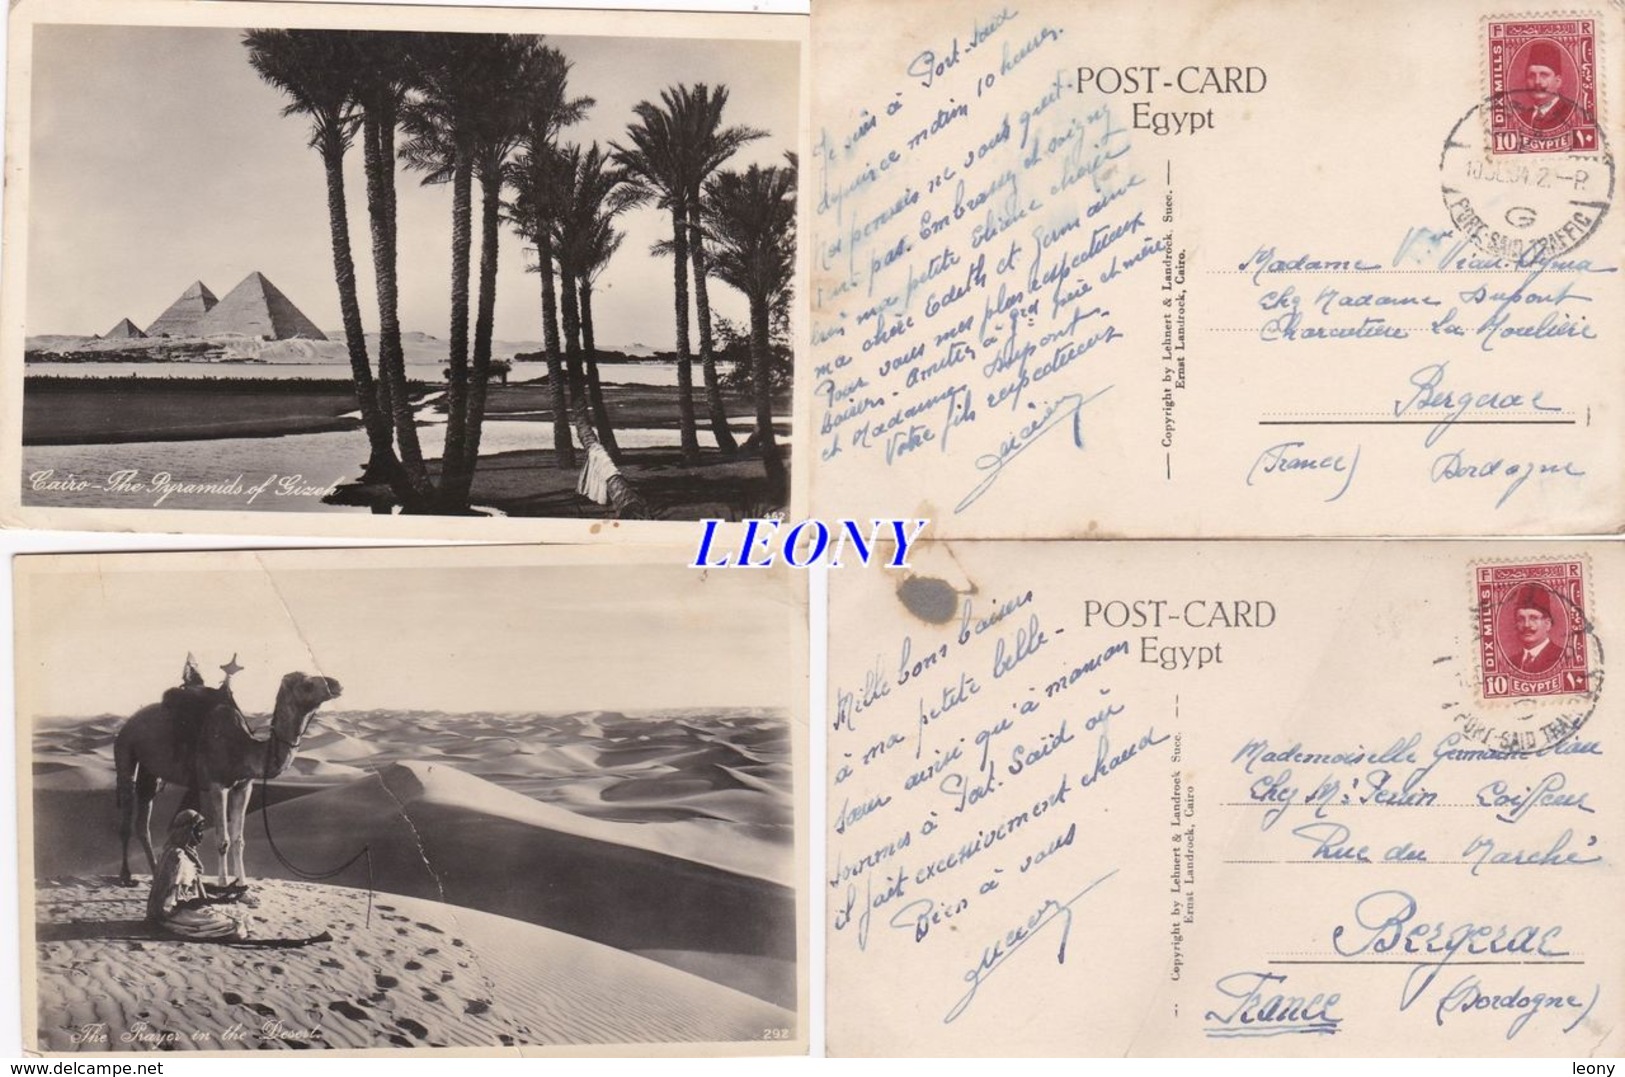 2 CPSM 9X14 D' EGYPTE - THE PRAYER In The DESERT - CAIRO - The PYRAMIDS Of GIZEH - Le Caire